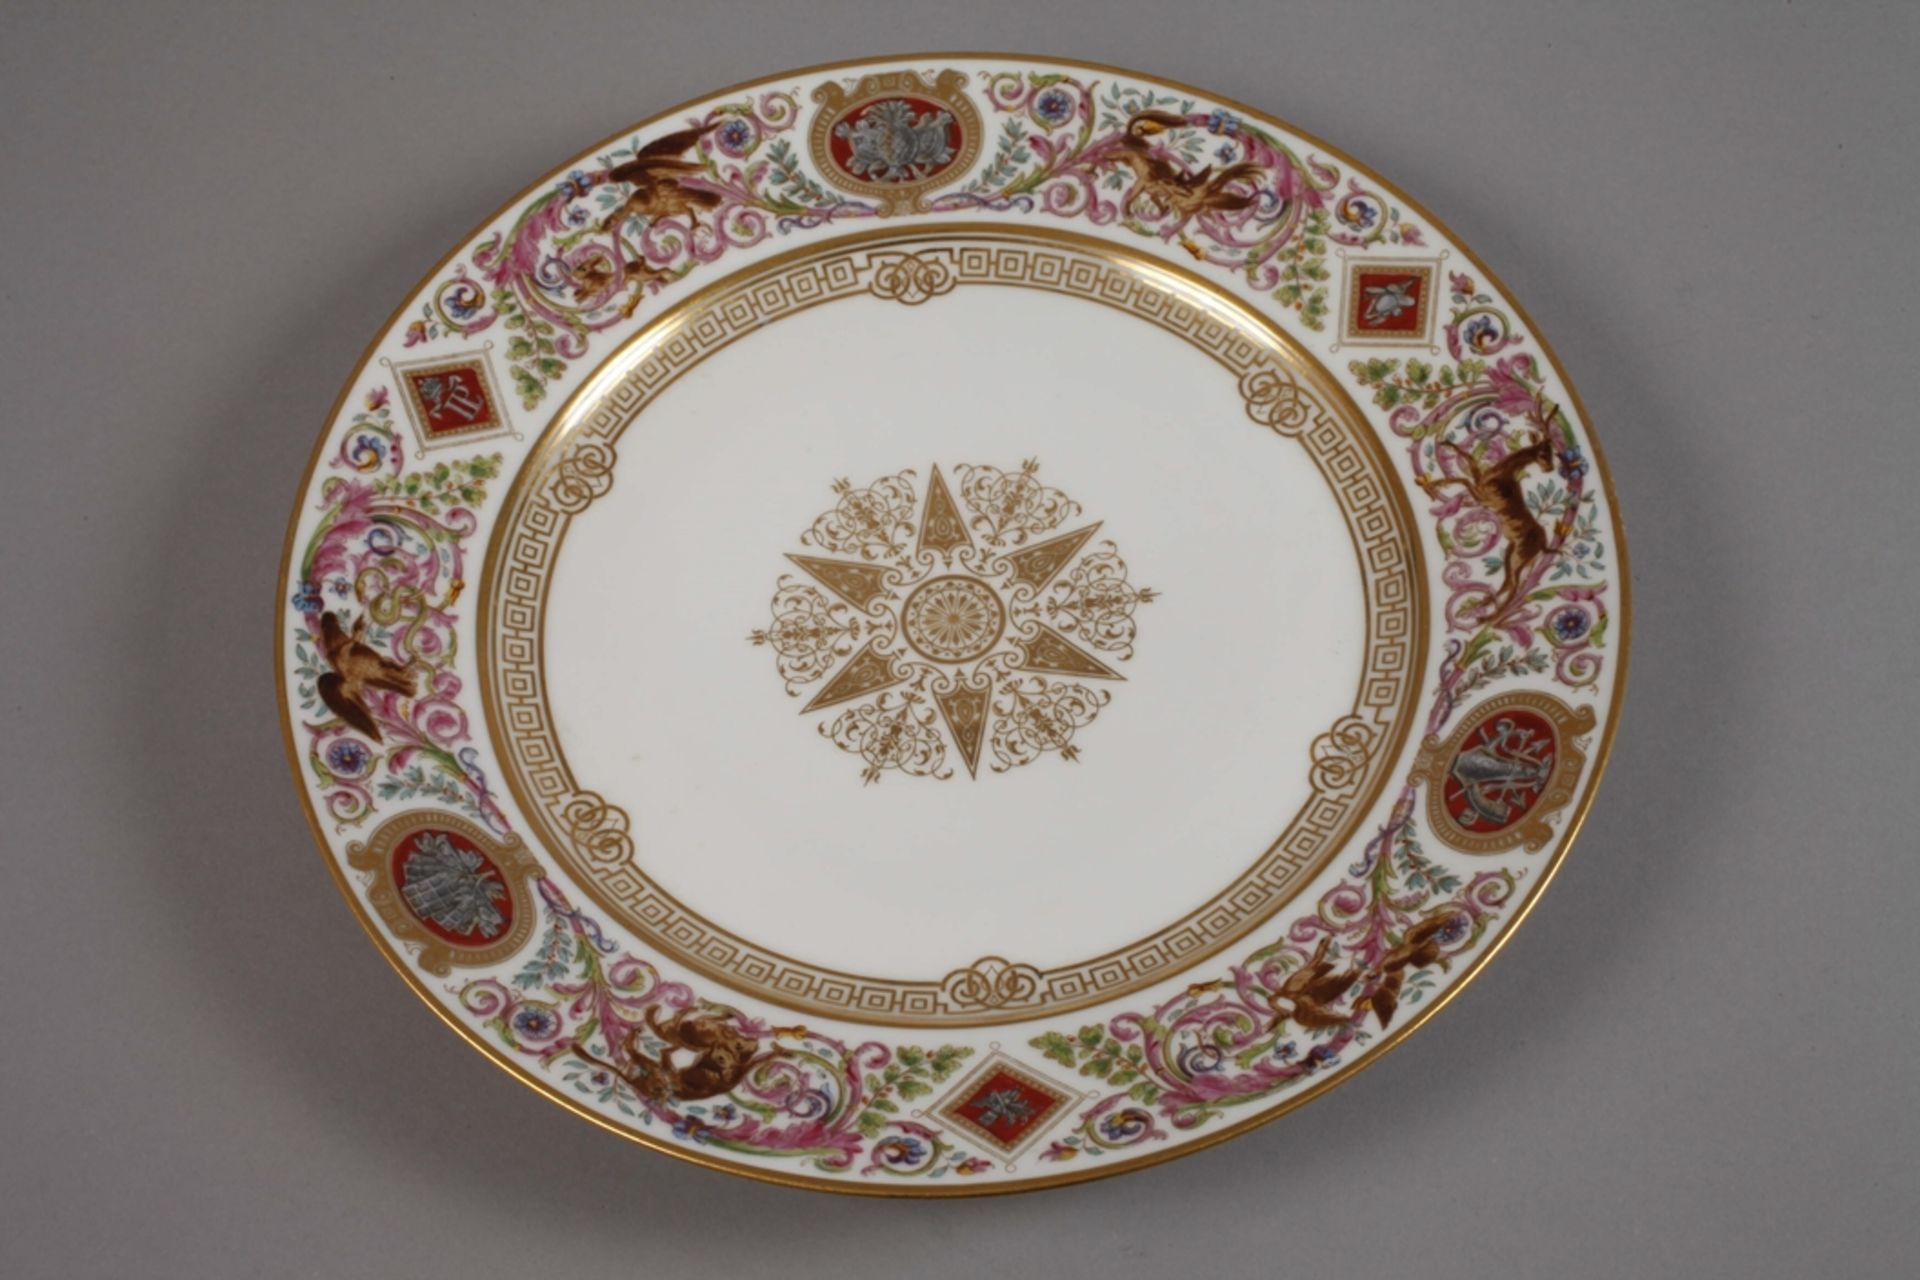 Sèvres ceremonial plate from the château of Fontainebleau - Image 2 of 3